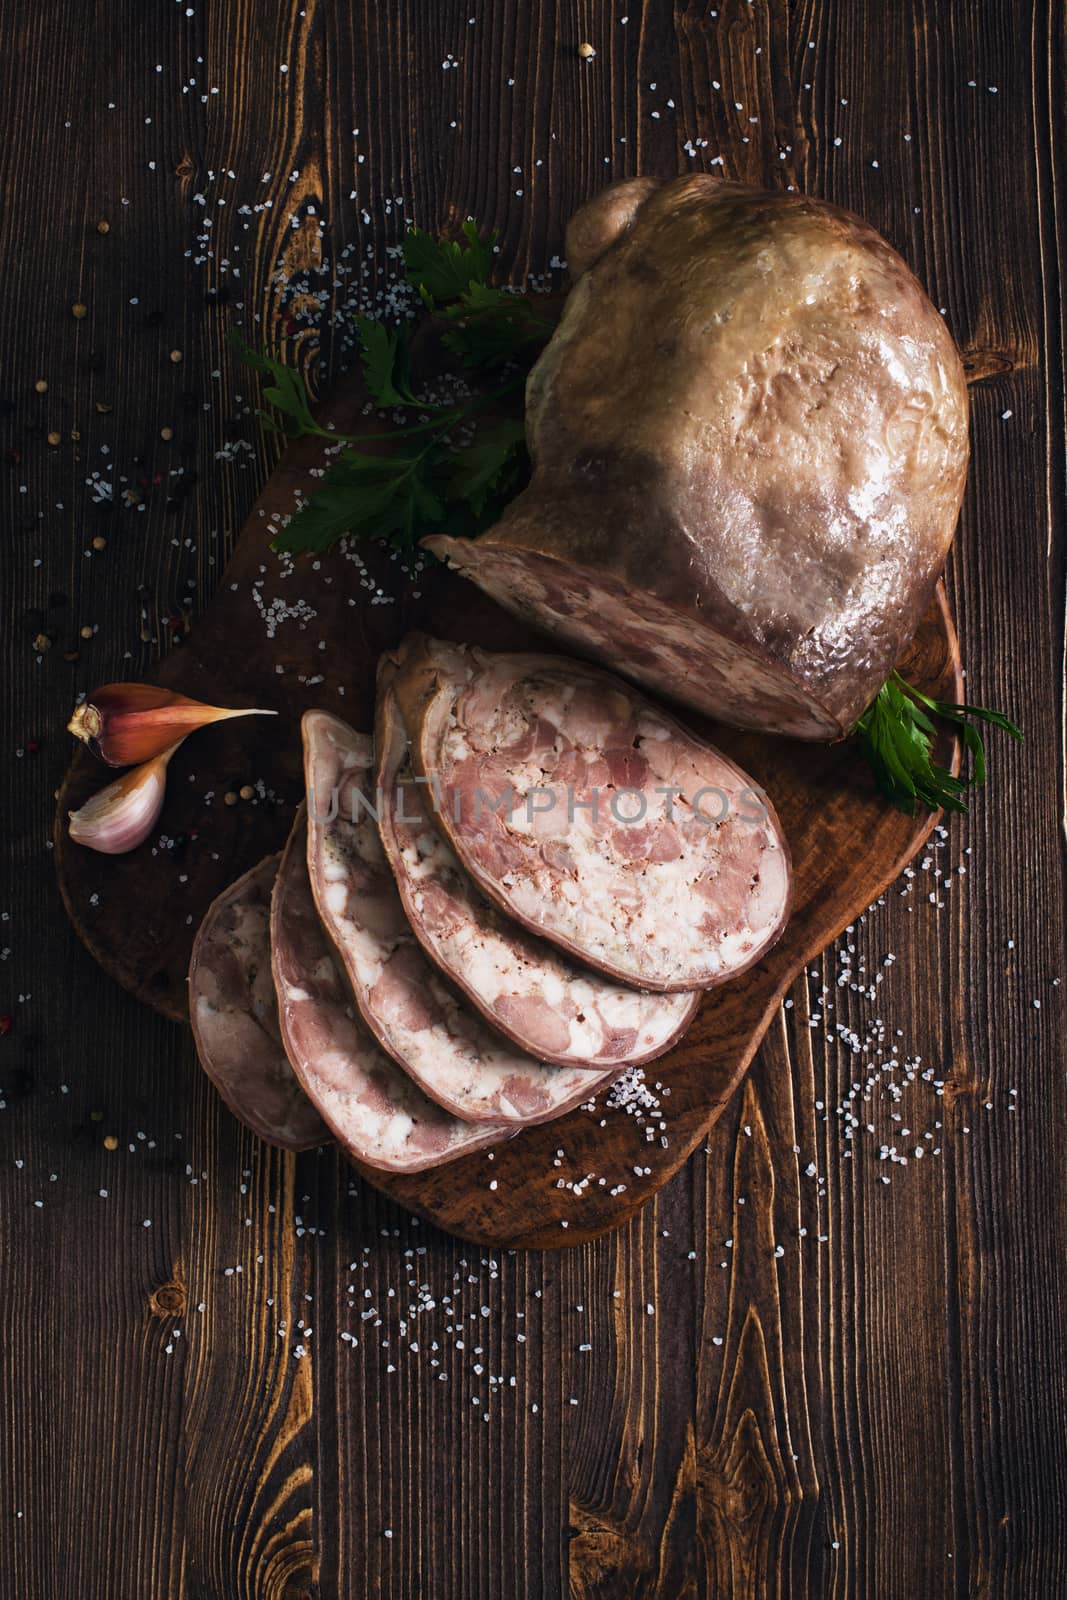 Sliced pork saltisons with herbs on a slate cutting board on wooden background